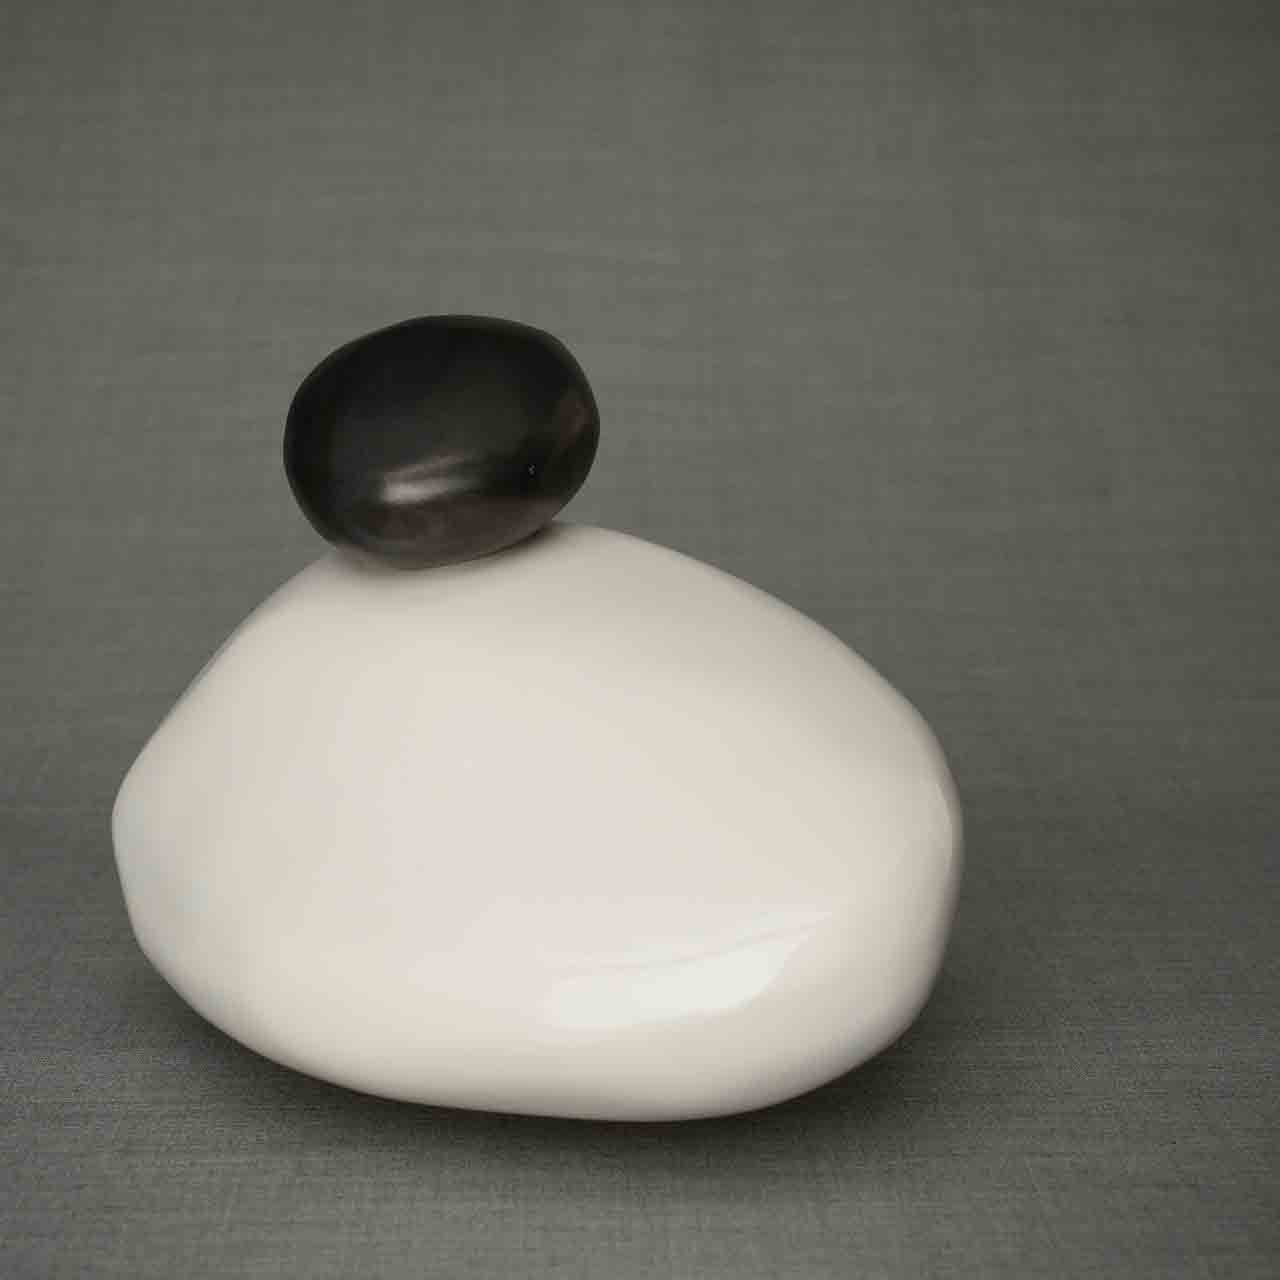 Pebbles Cremation Urn for Ashes in White and Matte Black Facing Left Dark Background